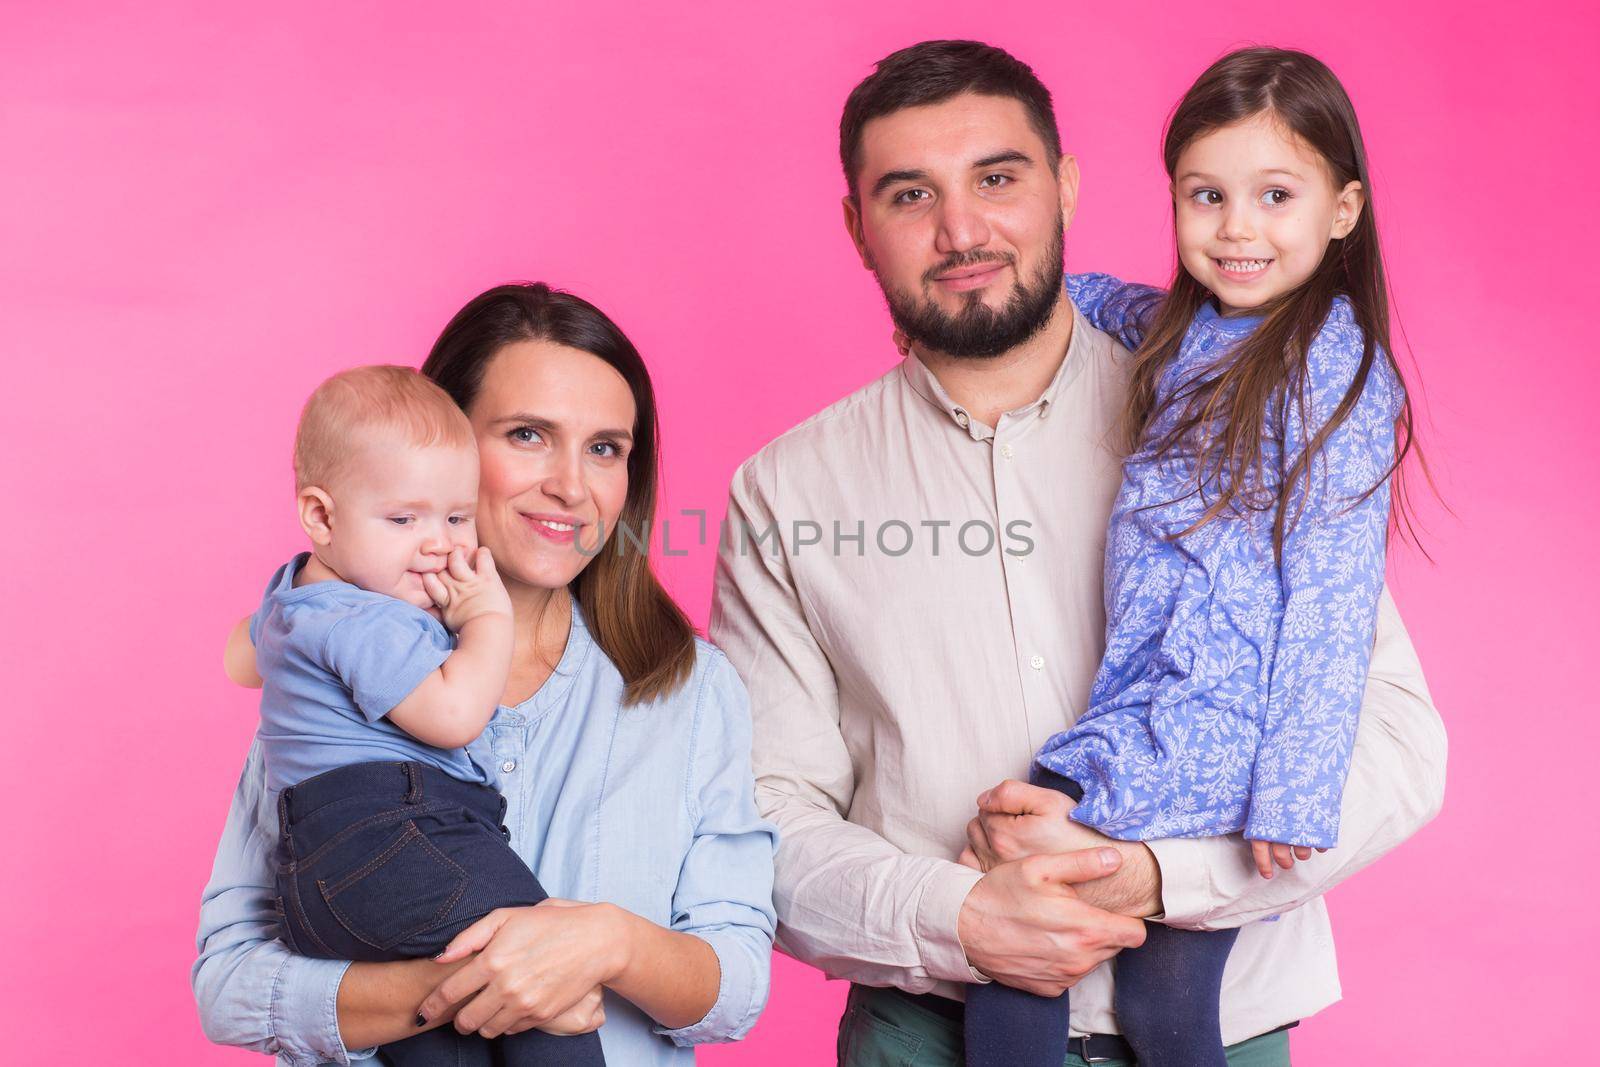 Cute family posing and smiling at camera together on pink background by Satura86